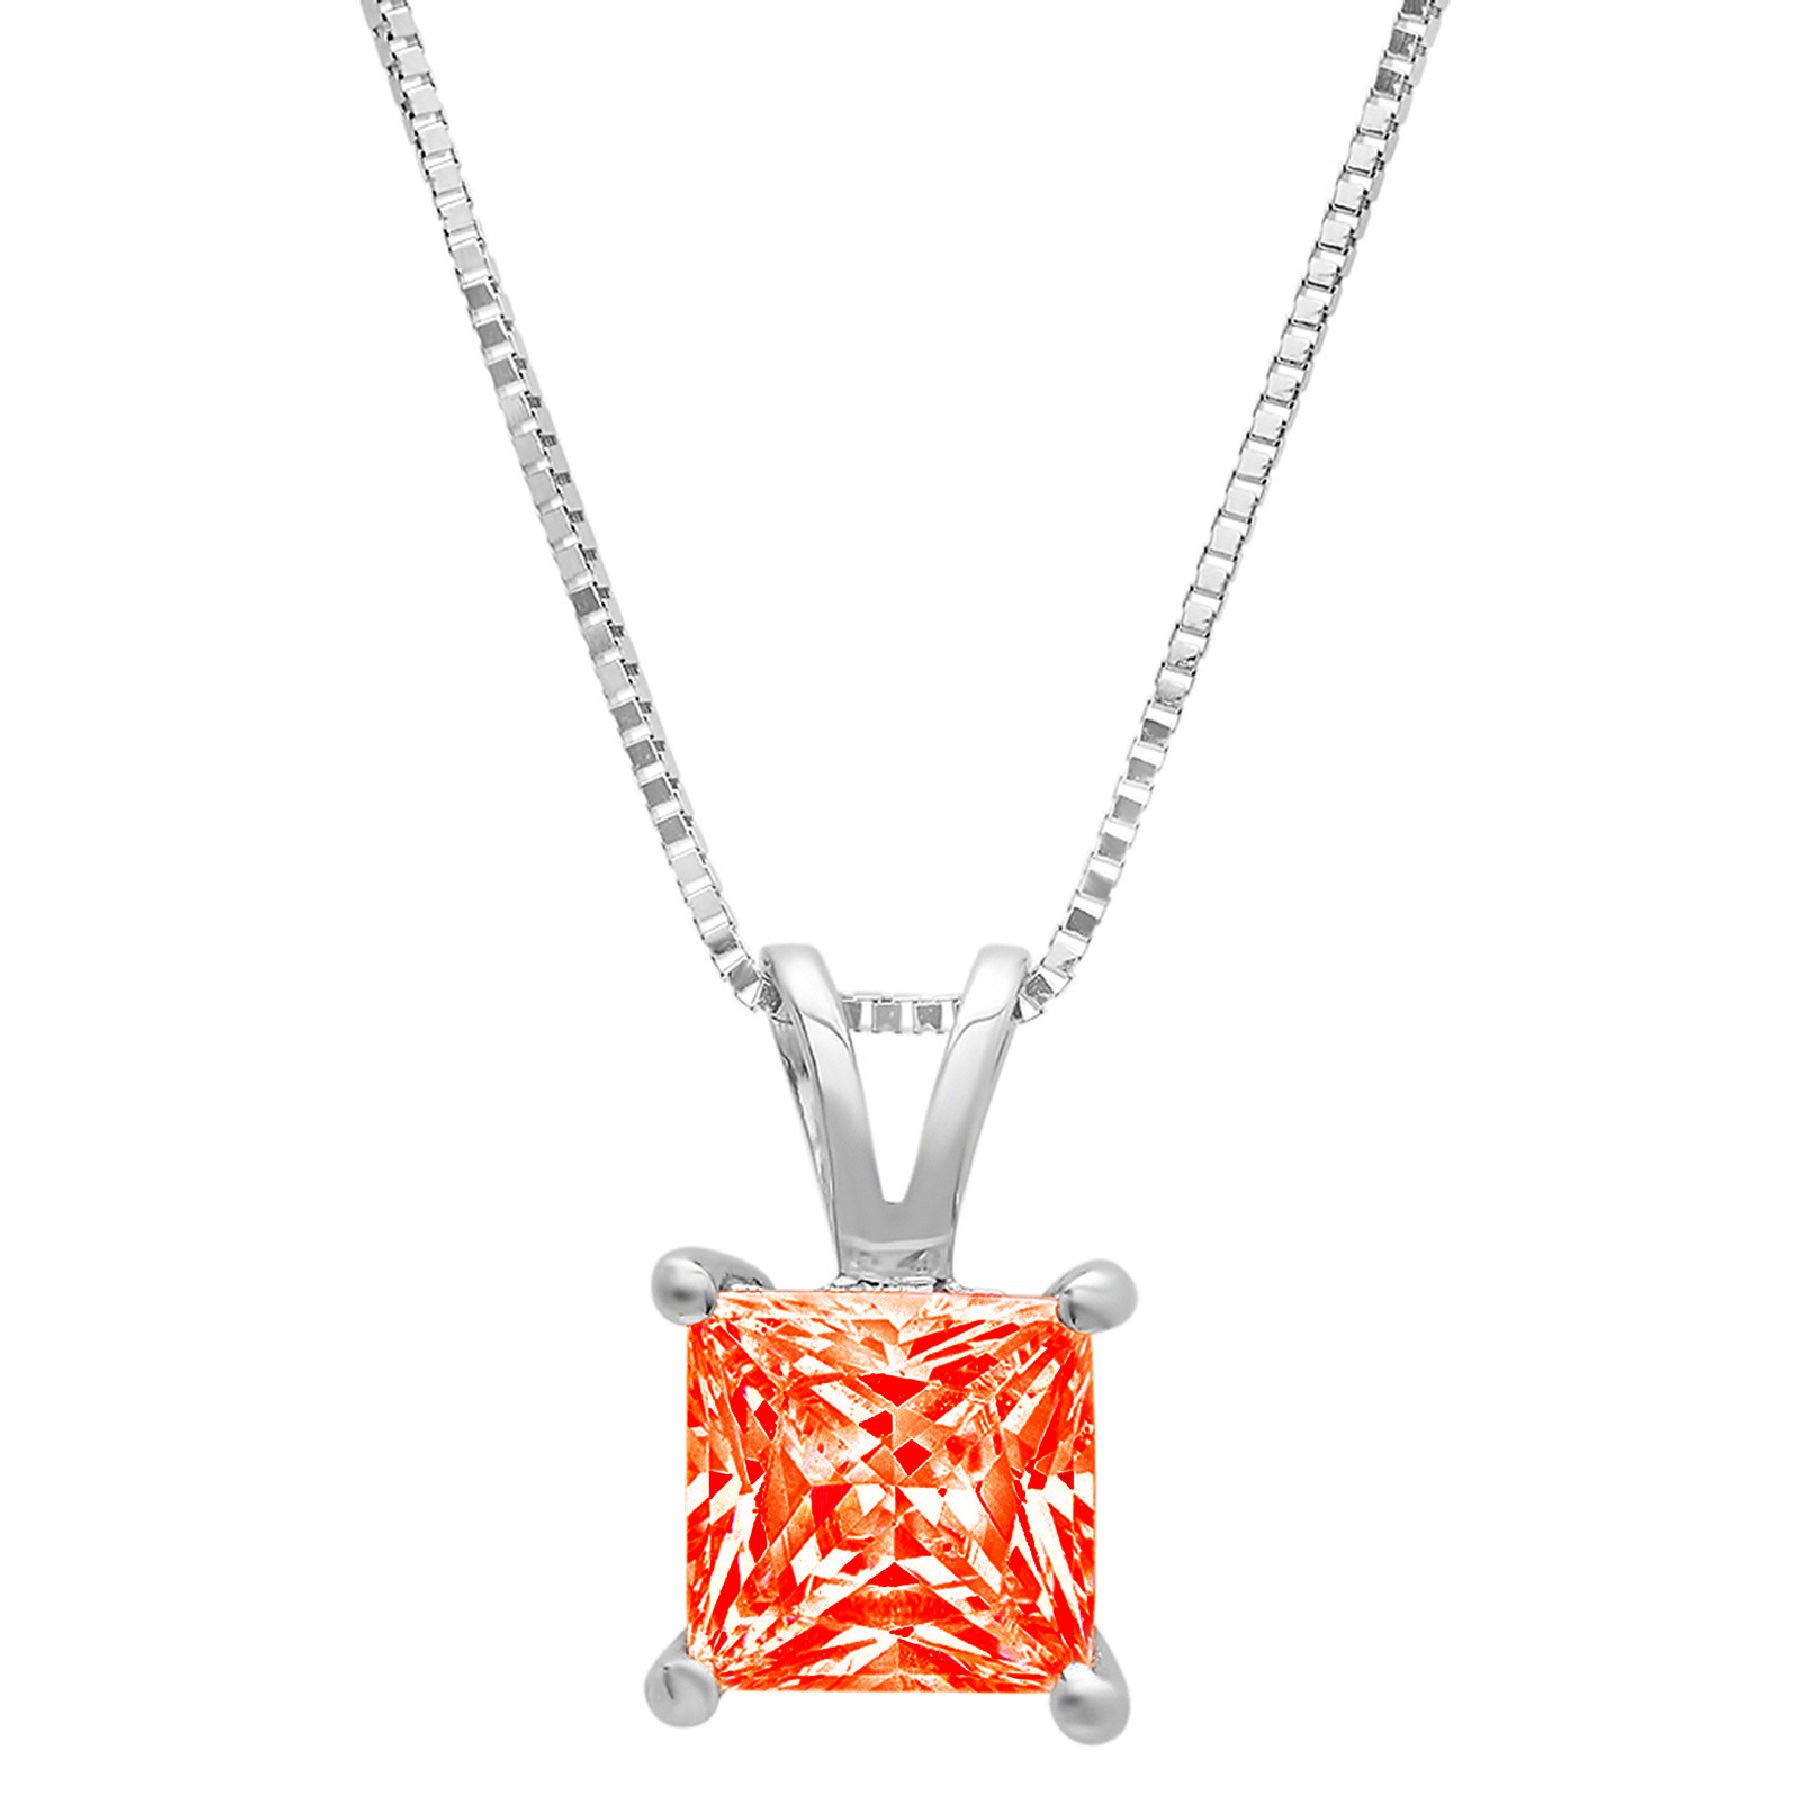 Clara Pucci 3.1 ct Brilliant Princess Cut Stunning Genuine Flawless Red Simulated Diamond Gemstone Solitaire Pendant Necklace With 18